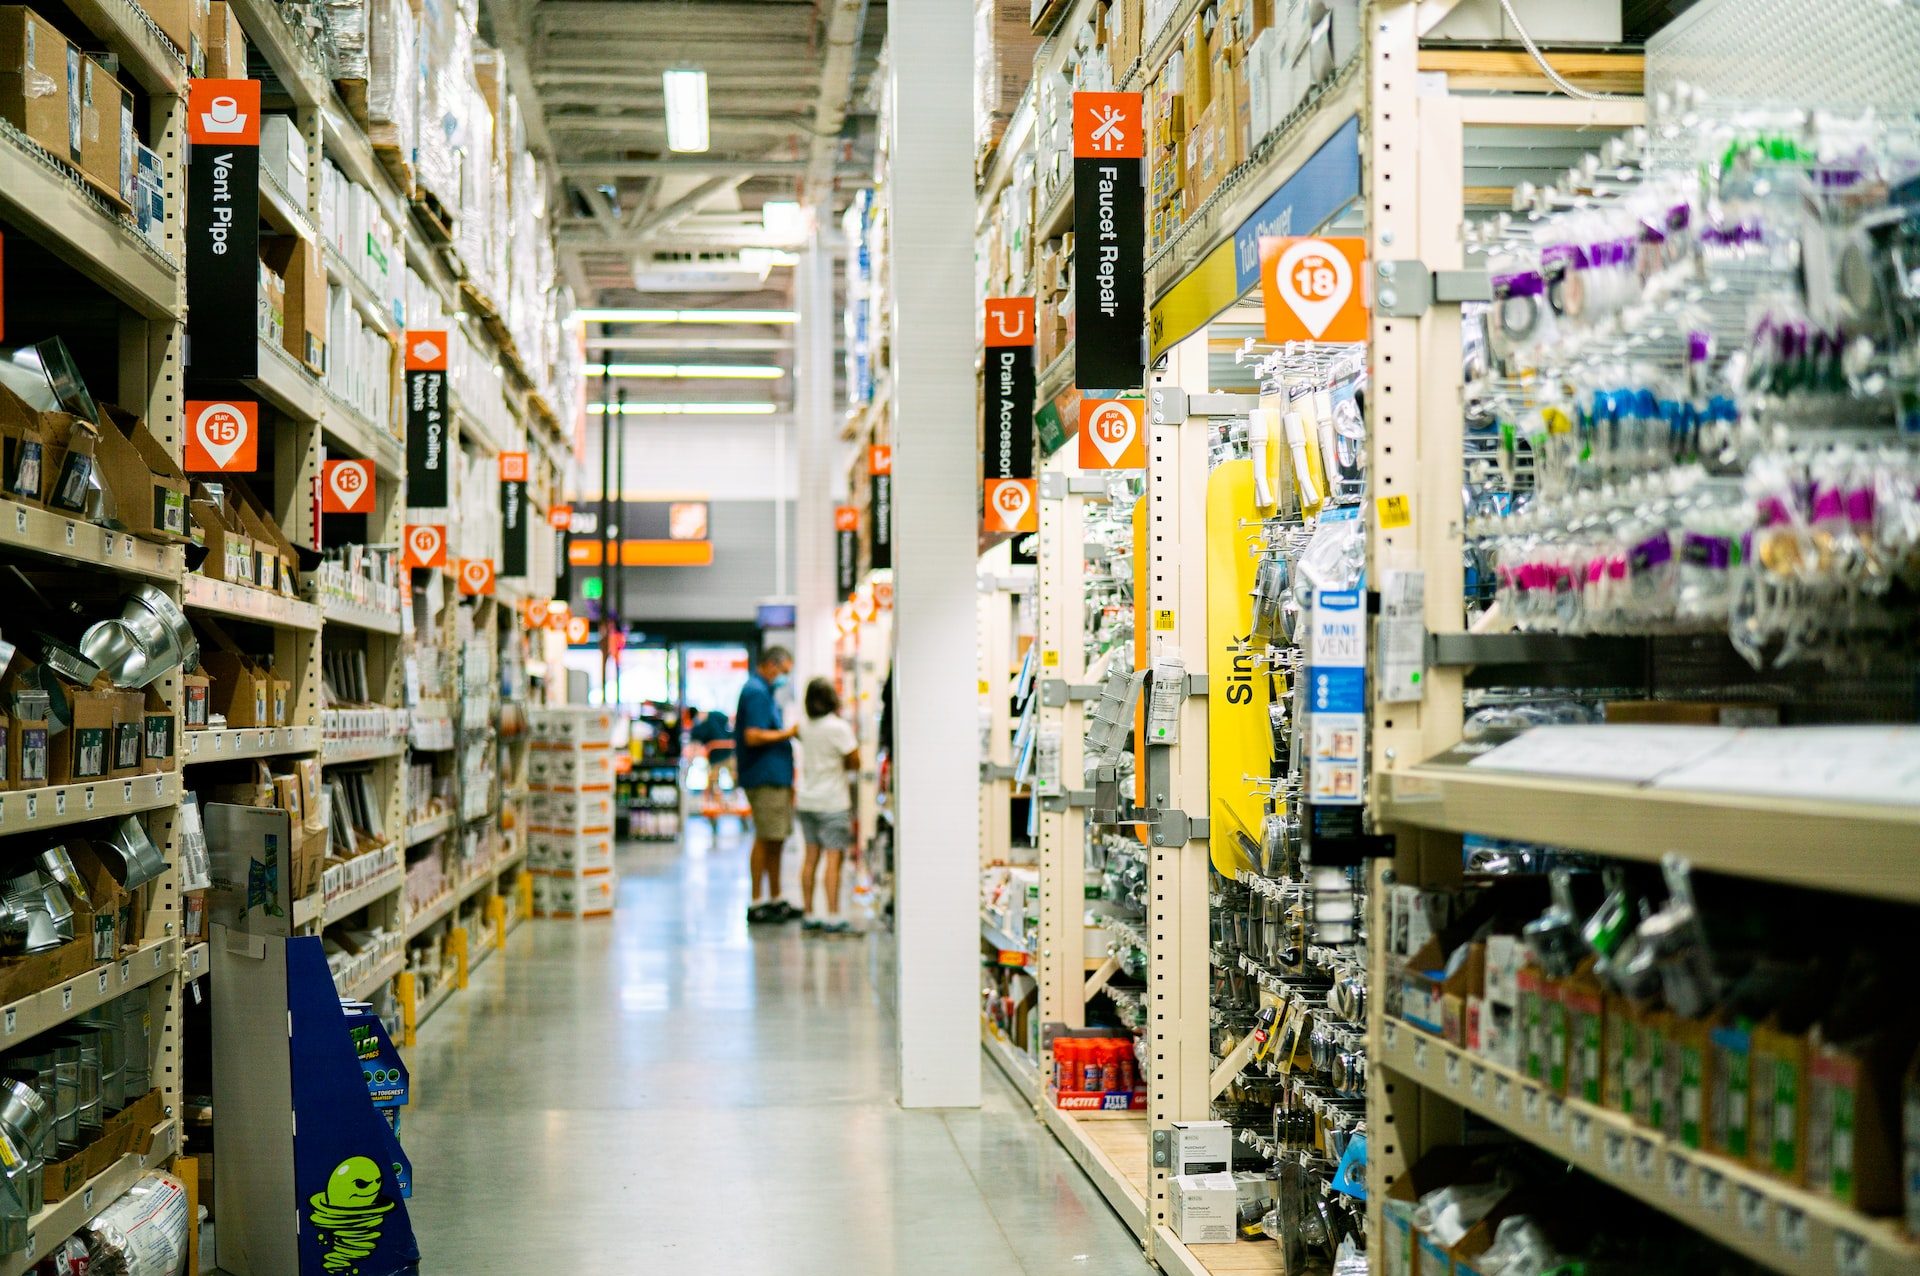 Business Model & Supply Chain Analysis of Home Depot